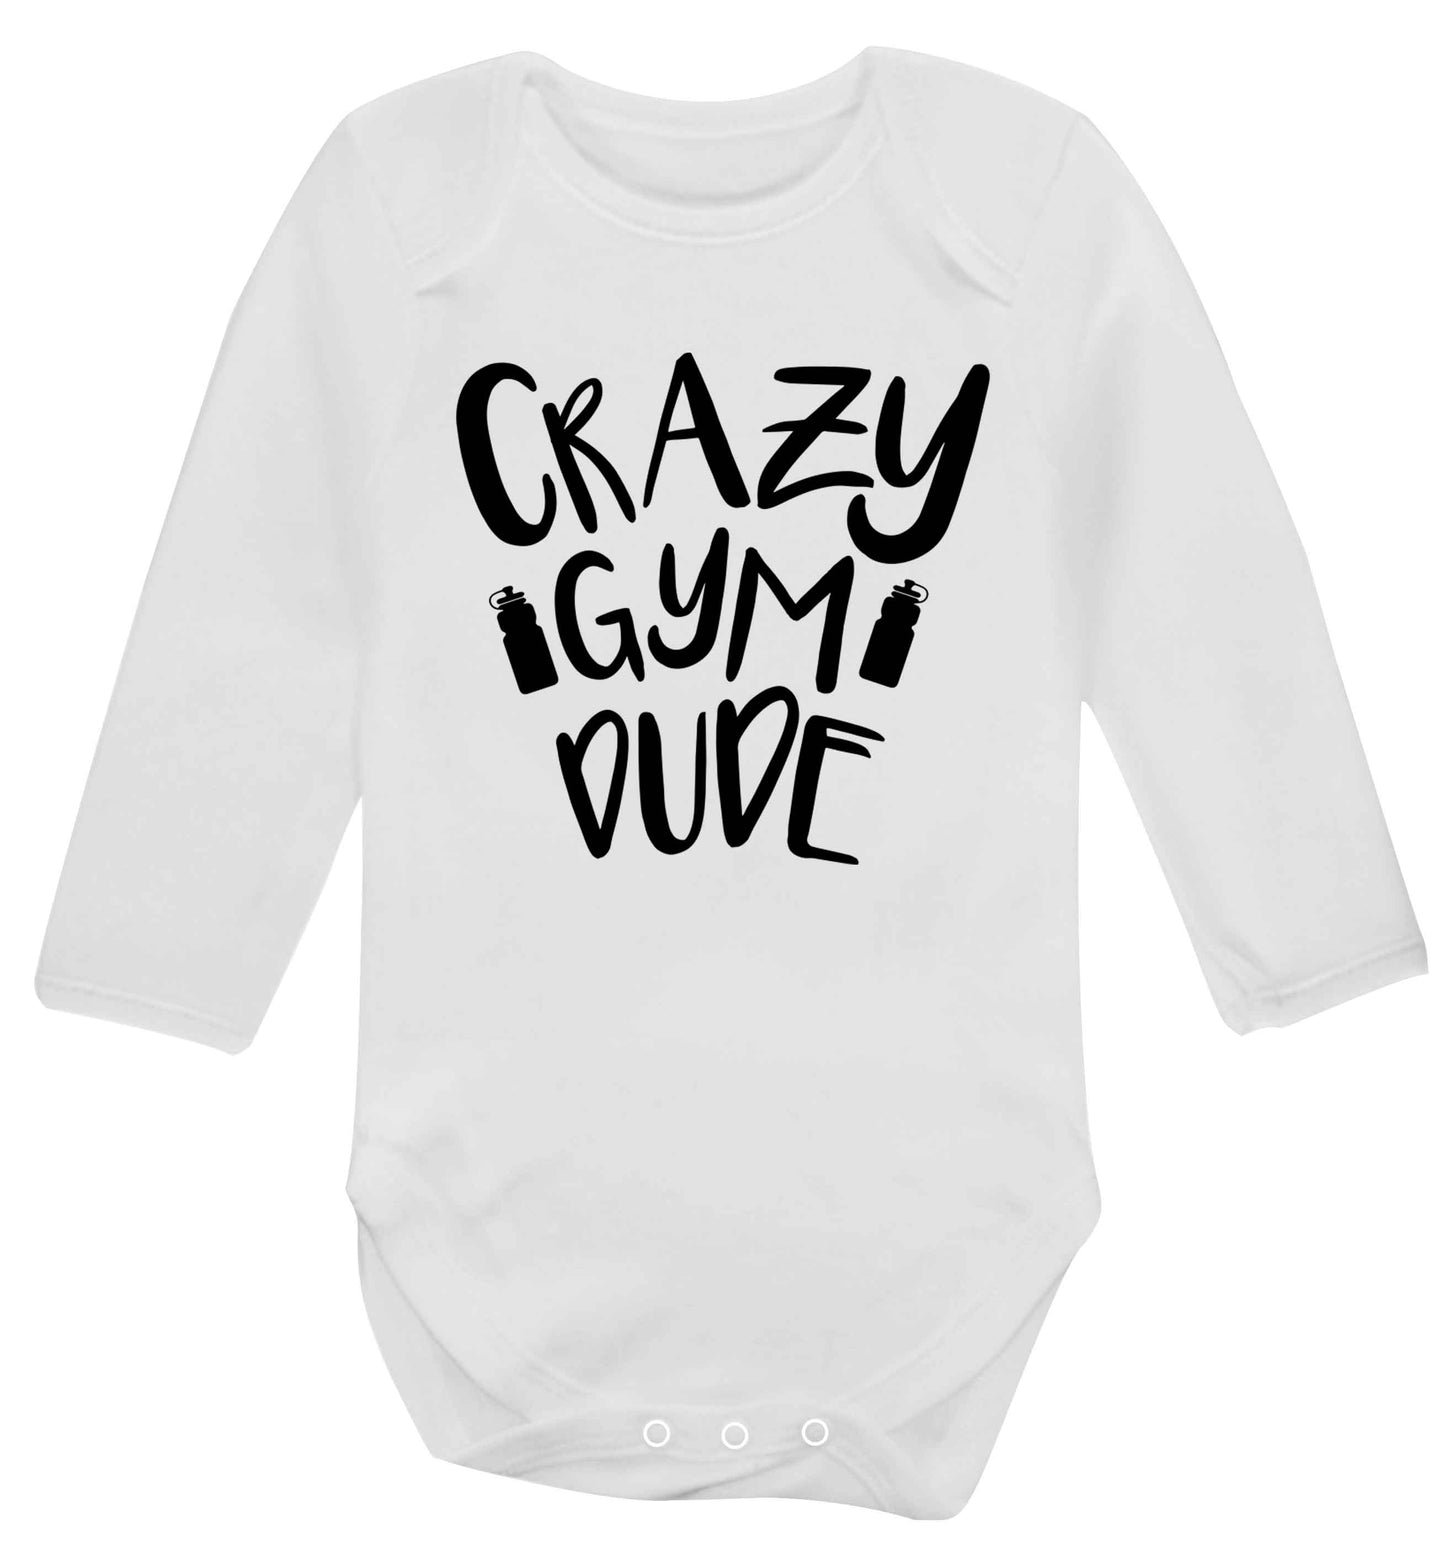 Crazy gym dude Baby Vest long sleeved white 6-12 months